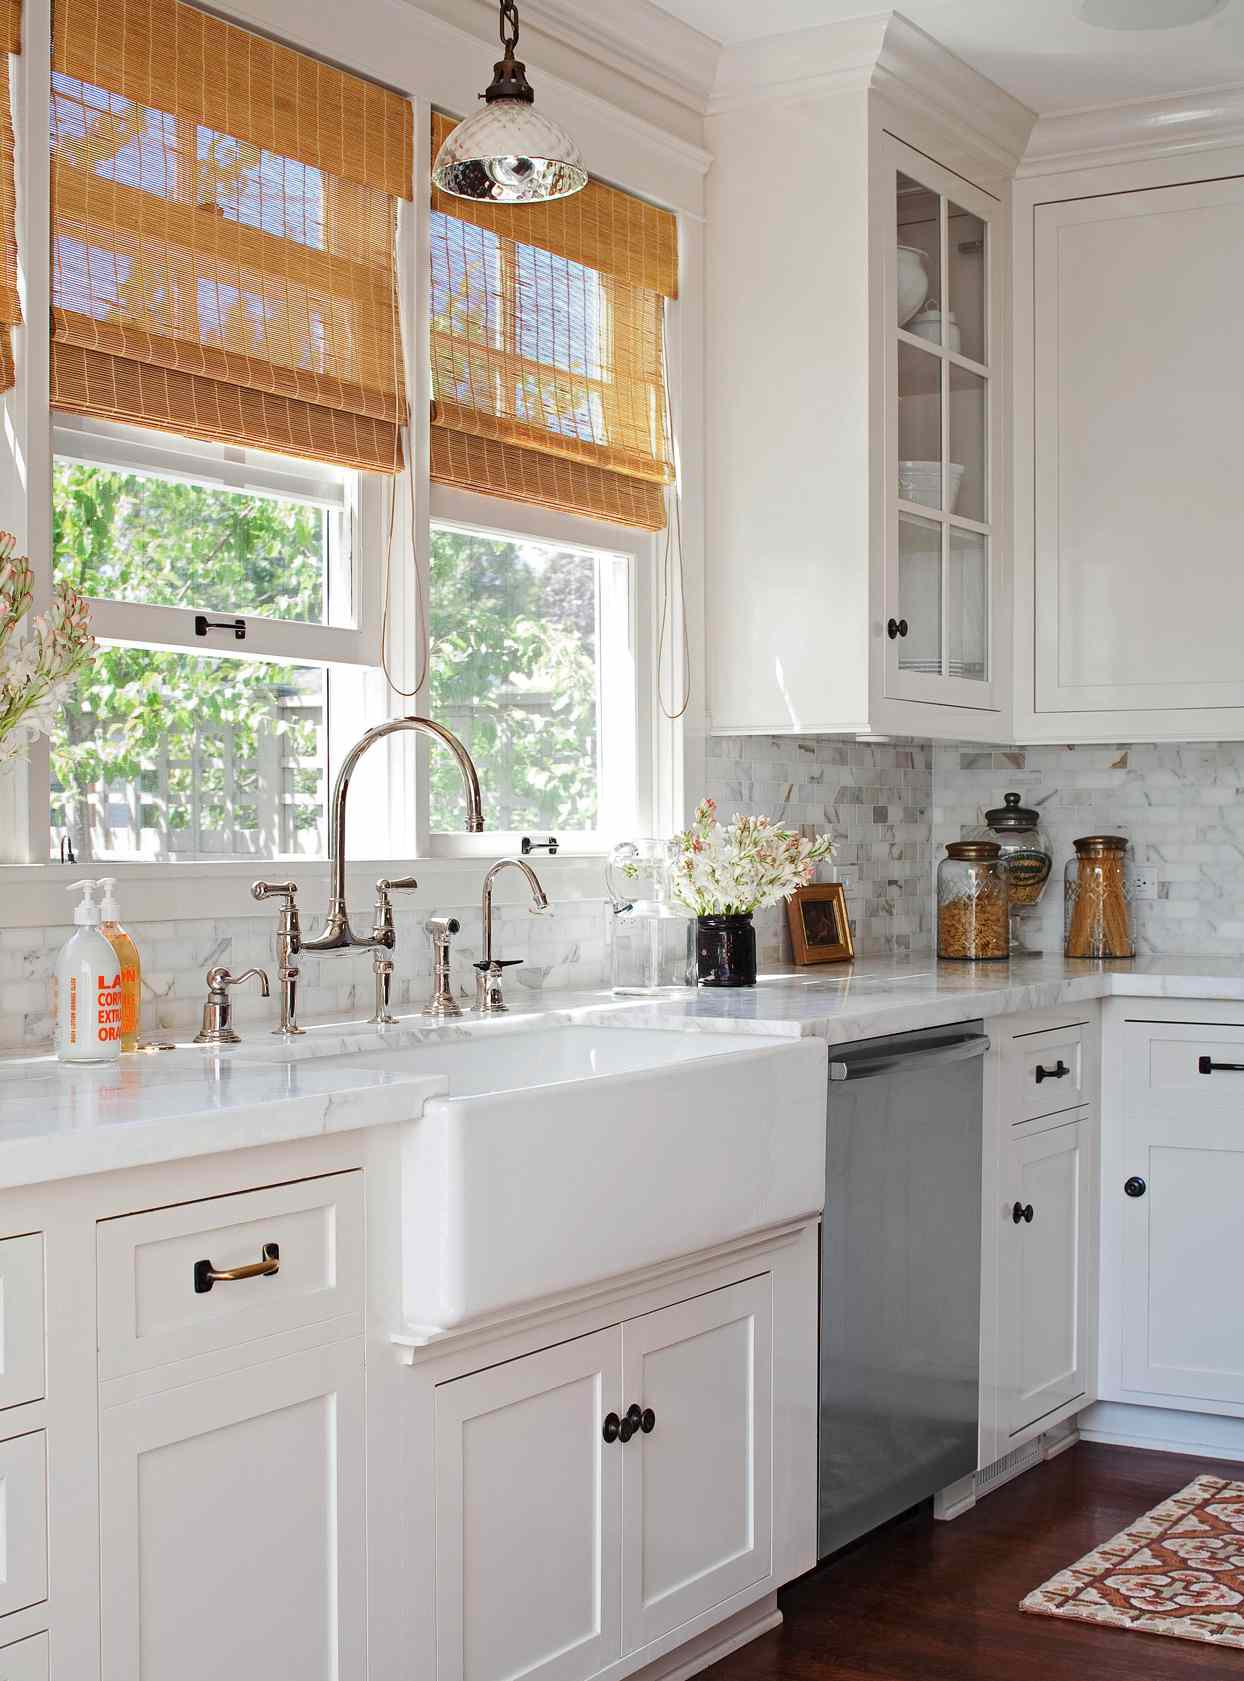 white kitchen cabinets with crystal pendant light above sink